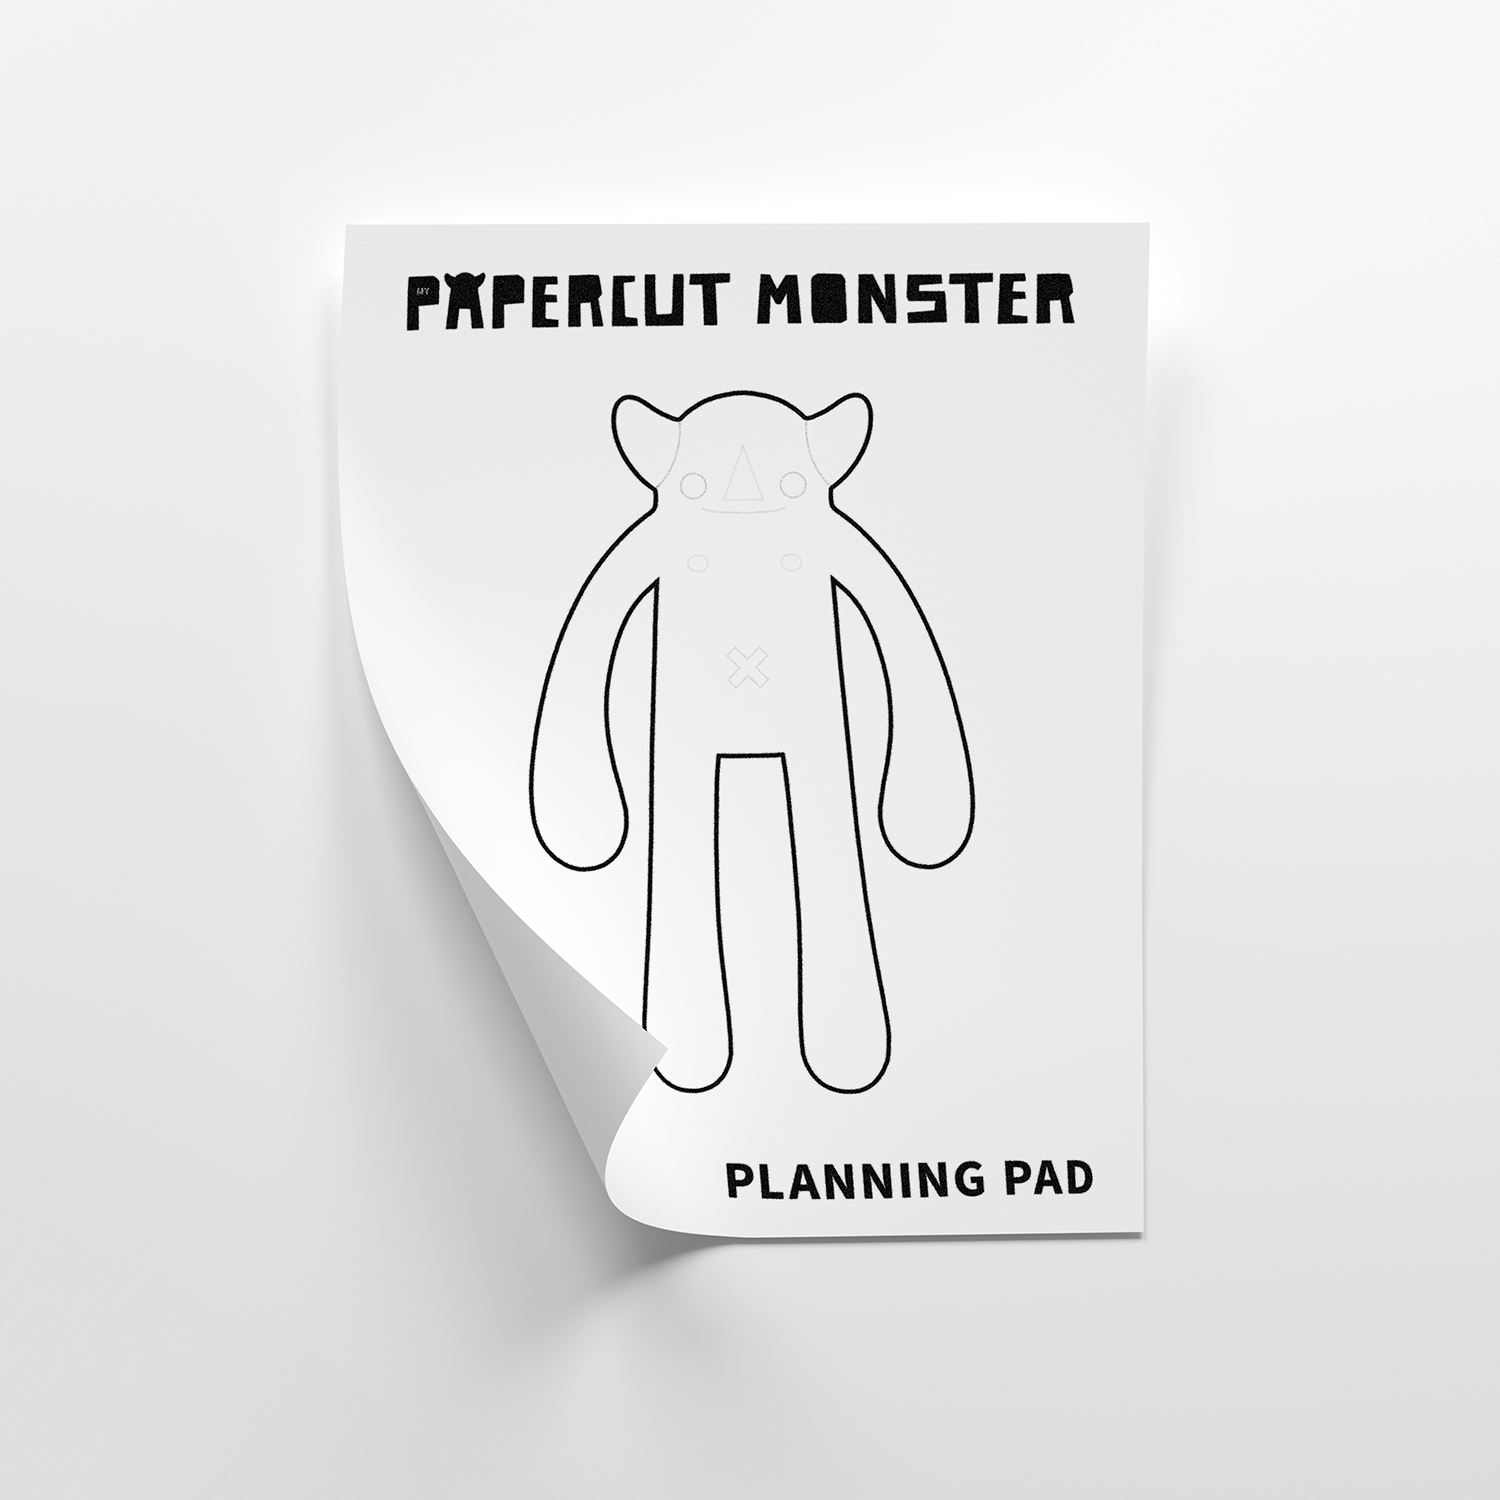 Free Planning Pad - Download and Print - Papercut Monsters - Handmade Stuffed Toy 